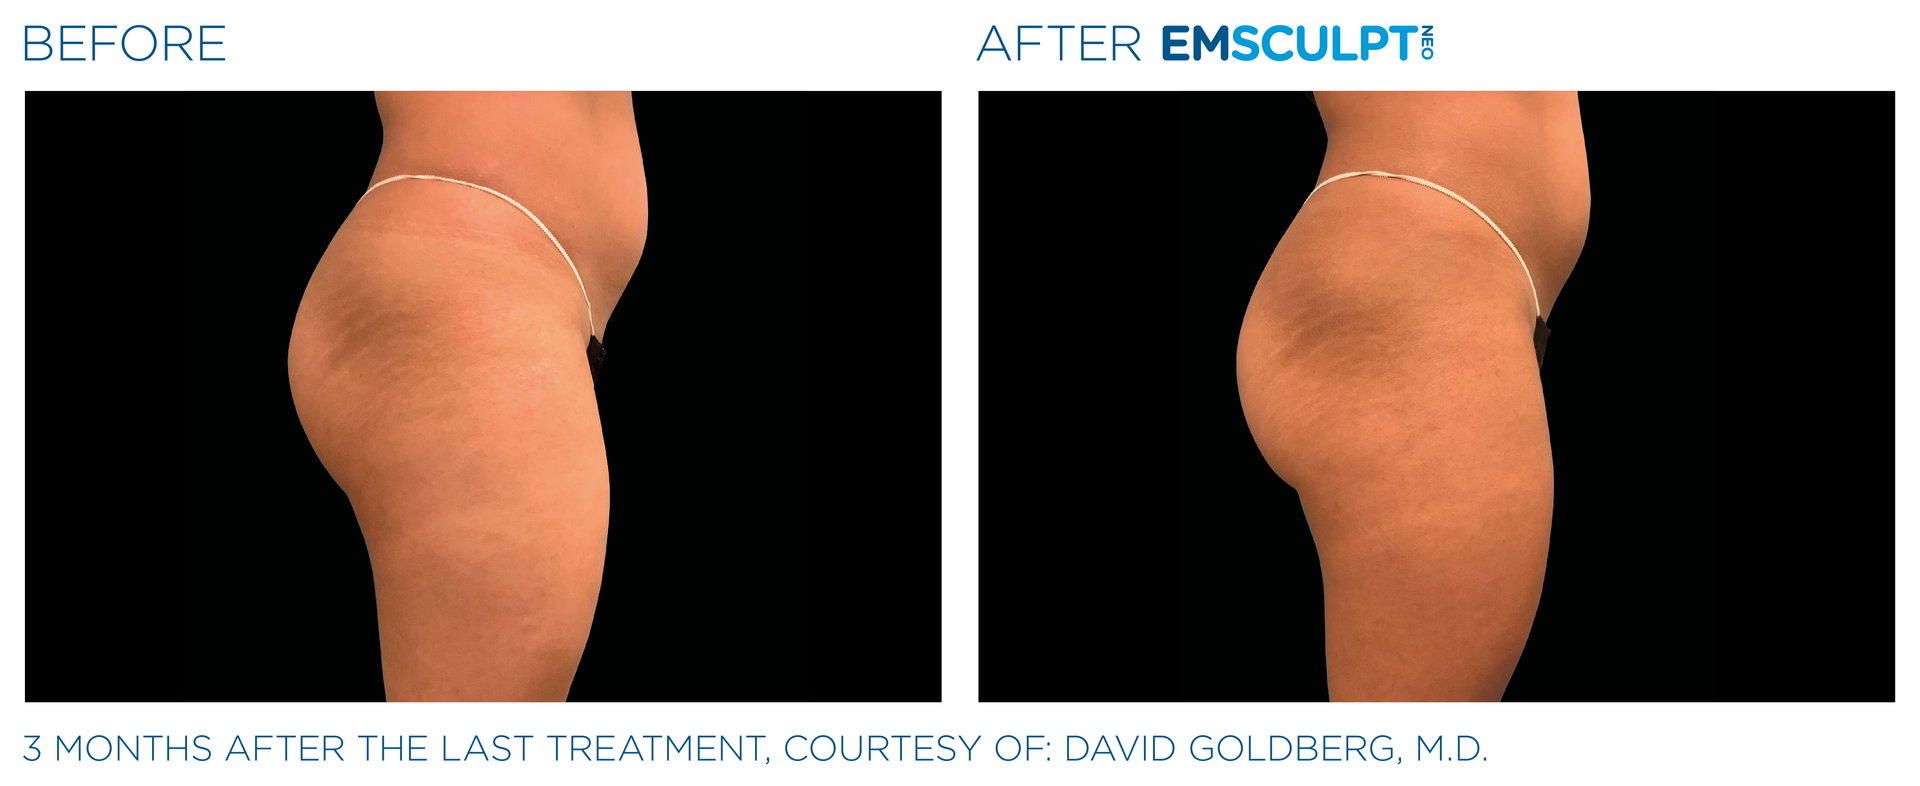 Check out those glute esults with Emsculpt neo at Dr. Mantor's Wrinkle and Weight Solutions in Westerville, OH book your free trial today!